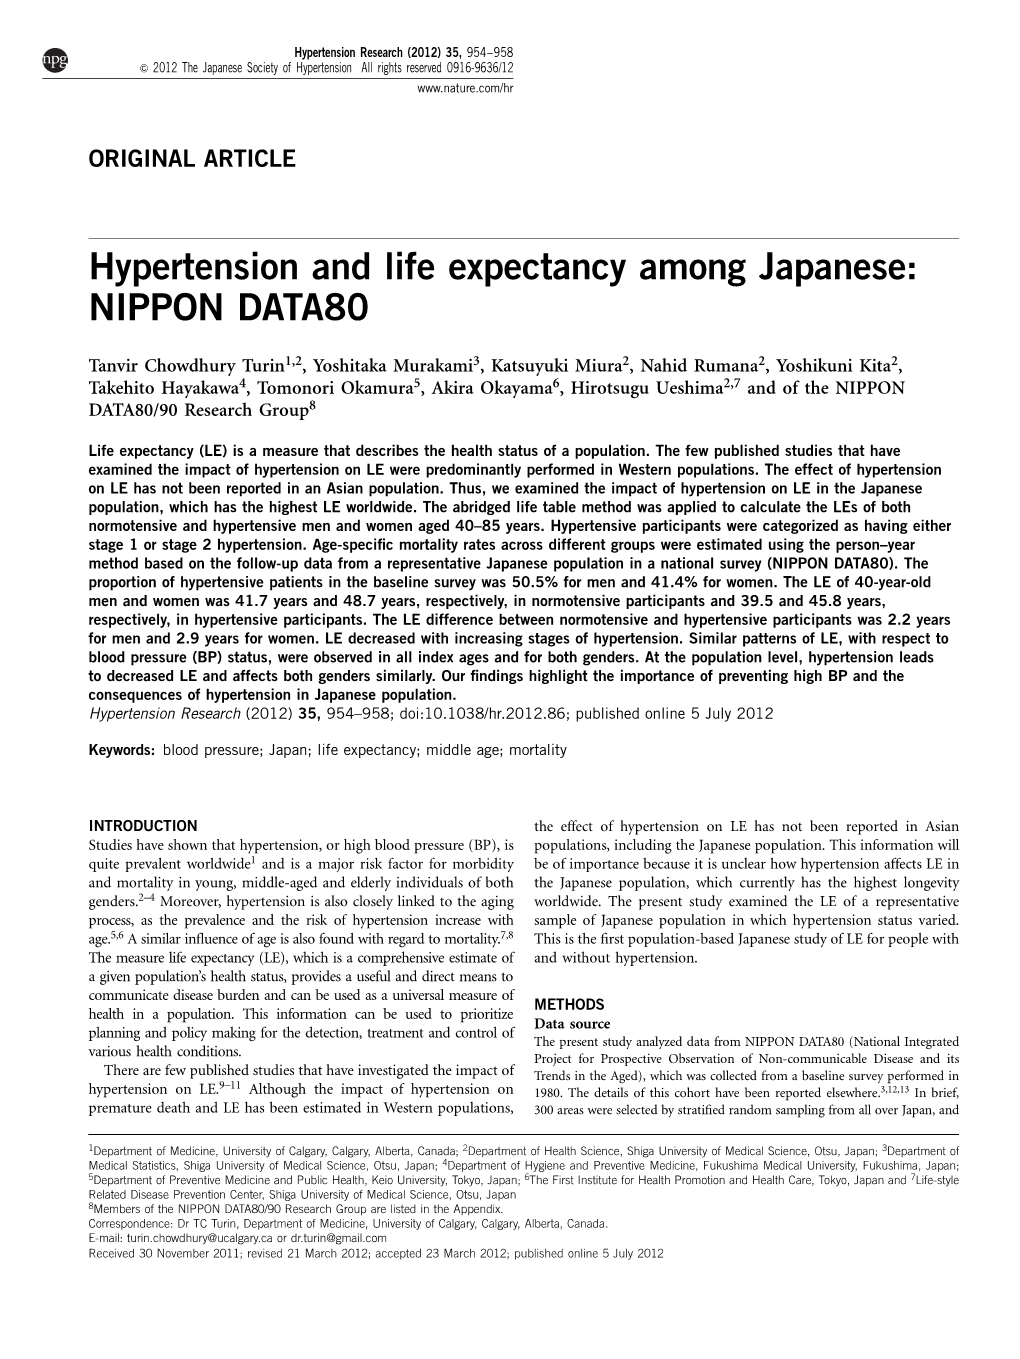 Hypertension and Life Expectancy Among Japanese: NIPPON DATA80